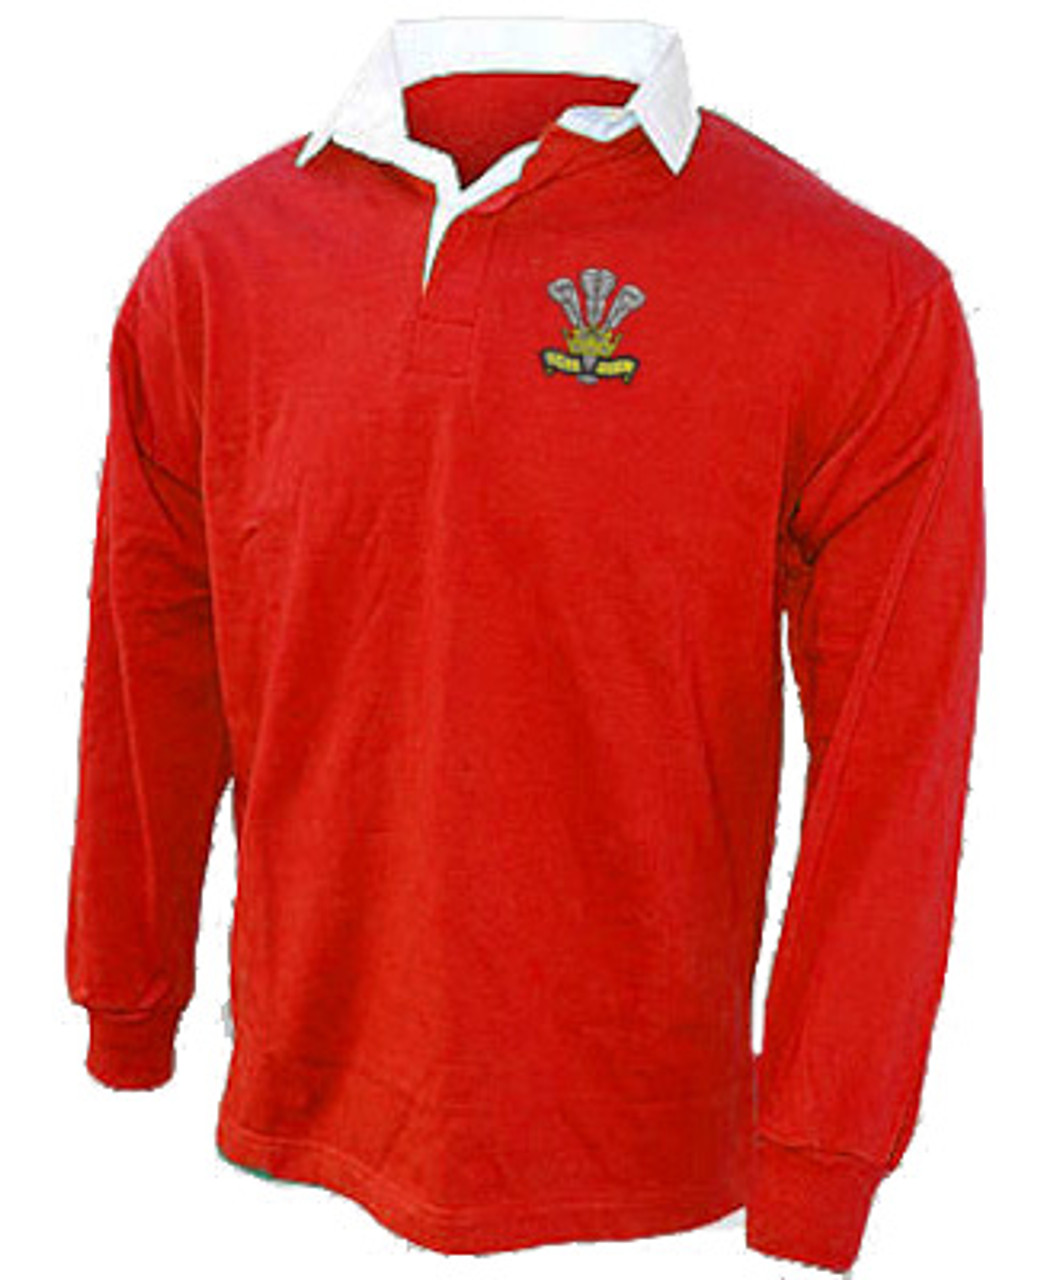 old rugby shirts